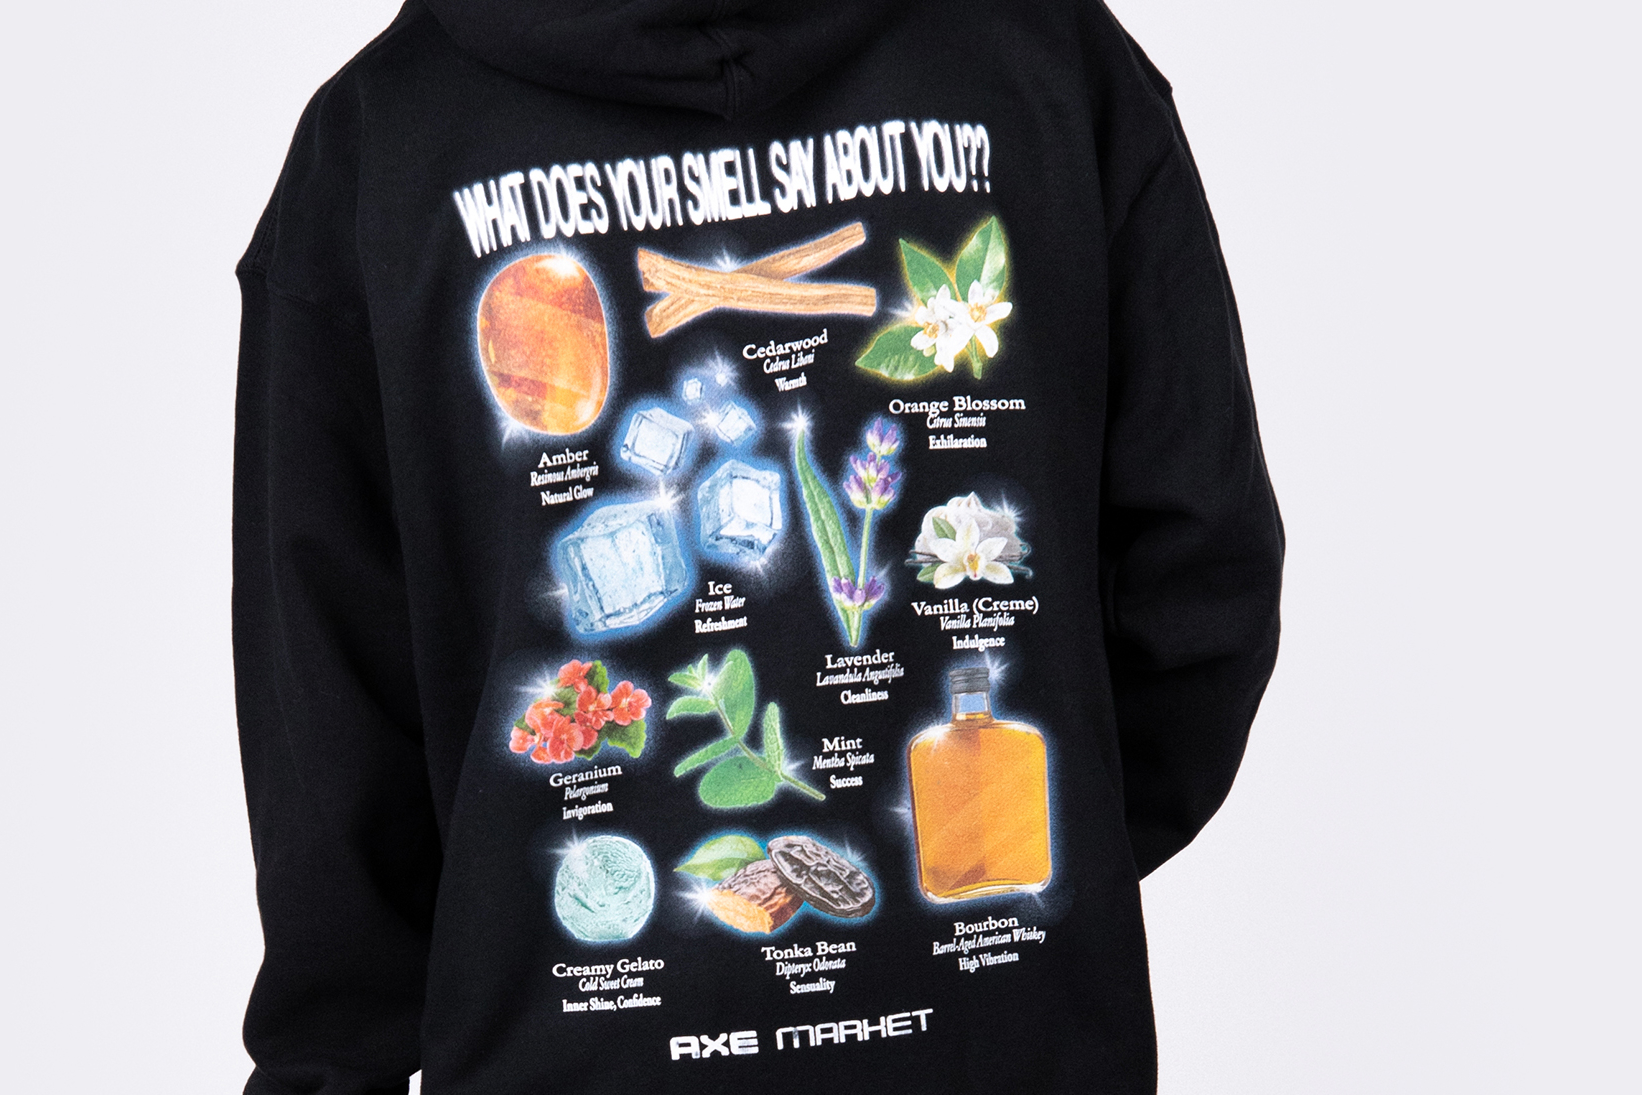 EXCLUSIVE: This Hoodie Smells Like Your Middle School Crush